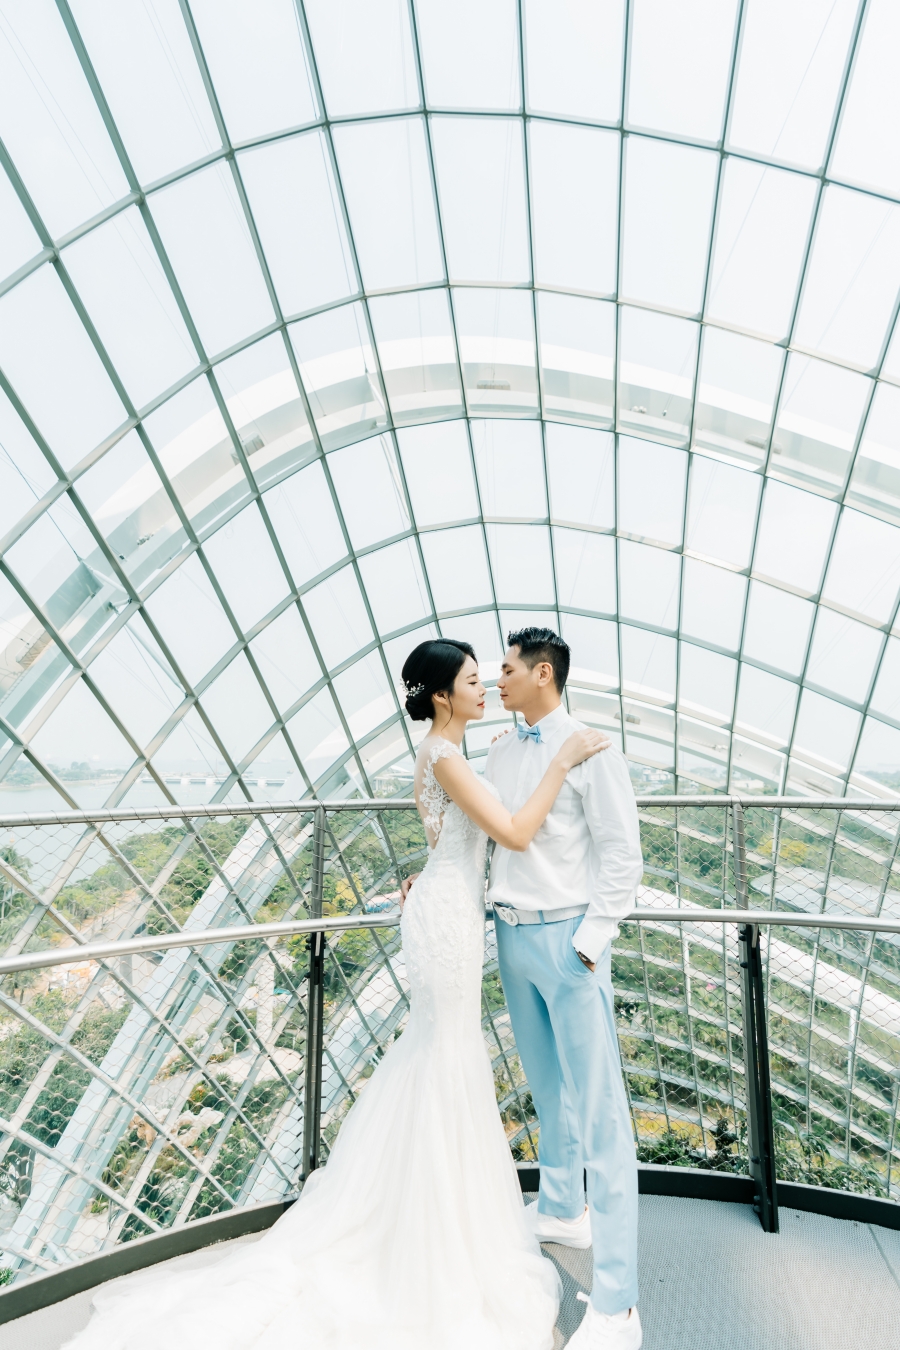 Singapore Pre-Wedding Photoshoot At Cloud Forest, Fort Canning Spiral Staircase And Marina Bay For Korean Couple  by Michael  on OneThreeOneFour 4